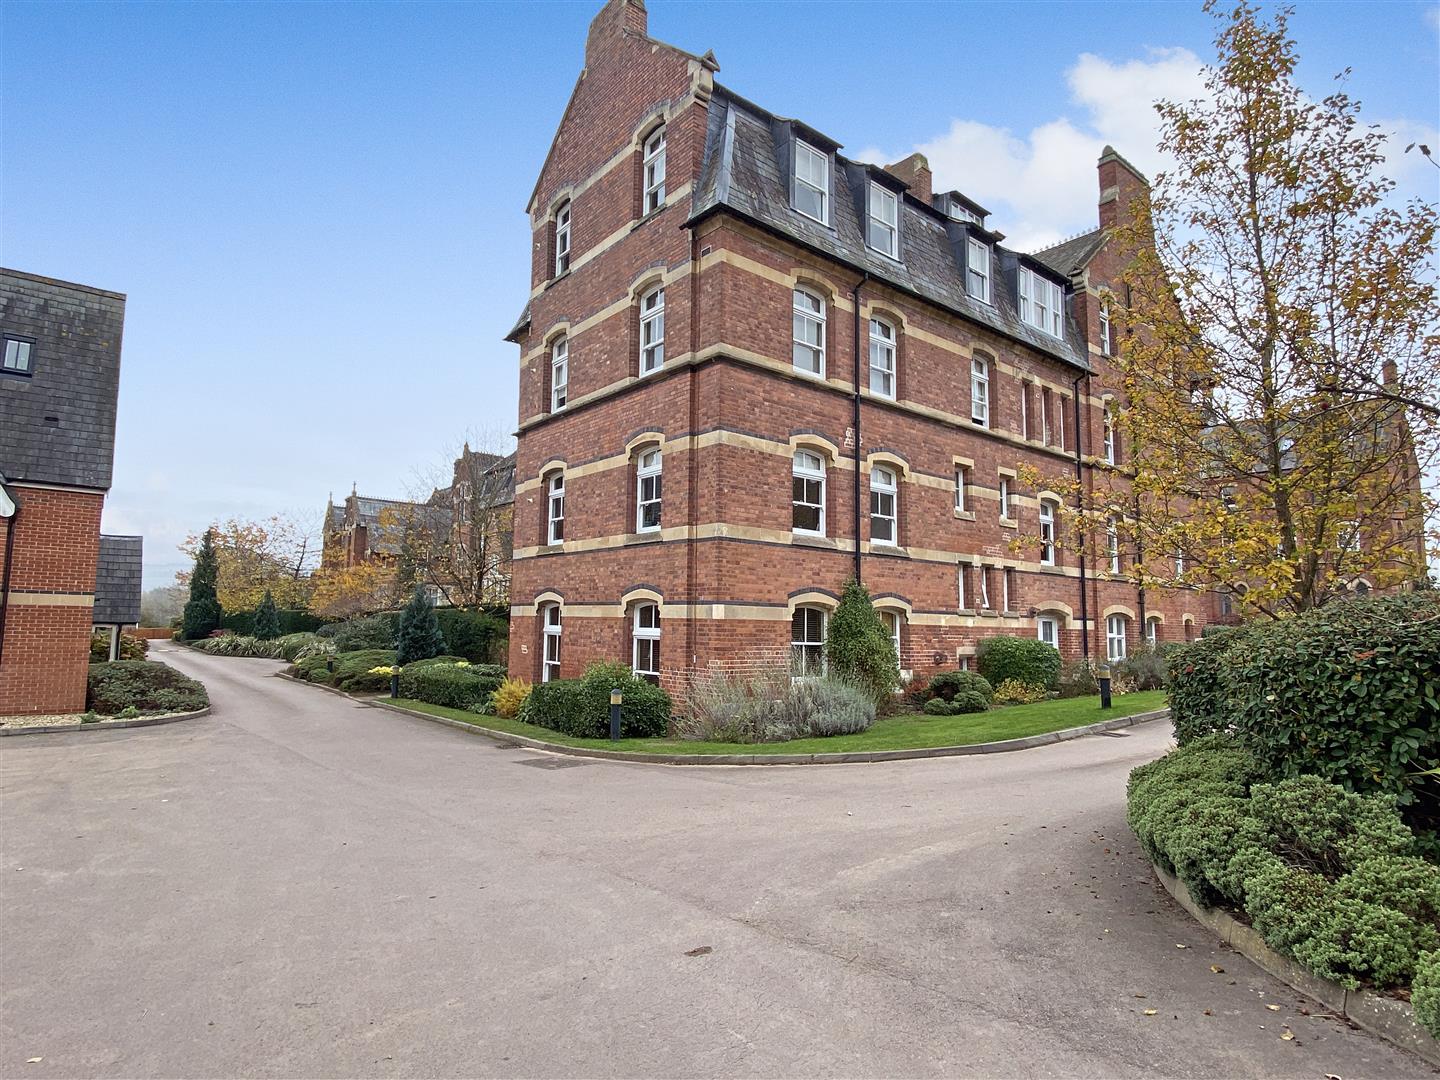 2 bed apartment for sale in Bartestree - Property Image 1